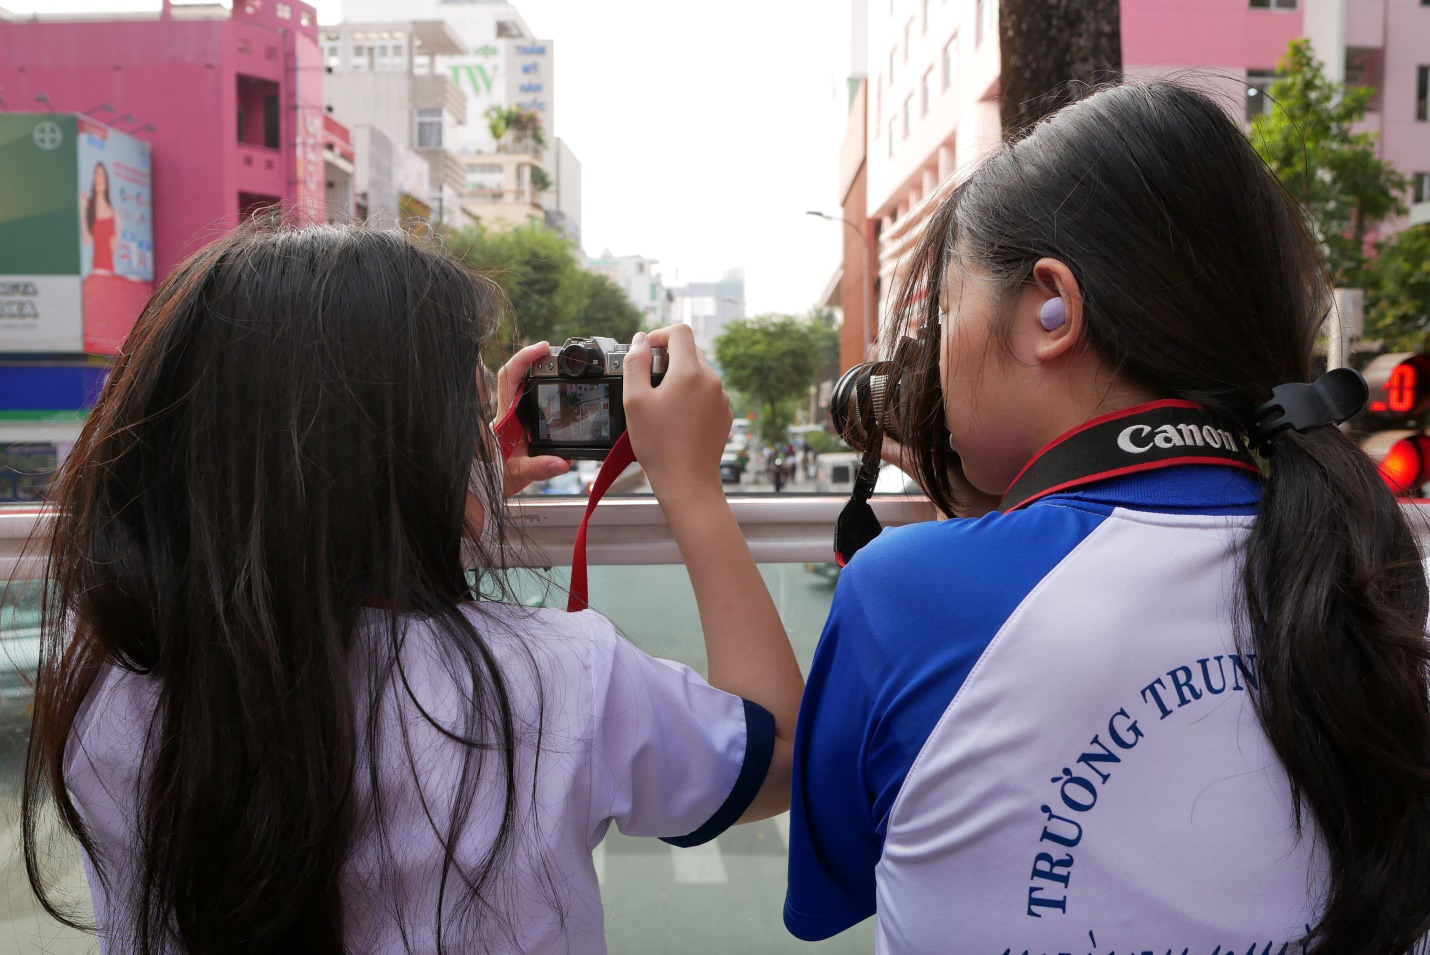 Students take photos from a double-decker bus during a photography contest in Ho Chi Minh City, April 9, 2023. Photo: Nguyen Cong Thanh / Tuoi Tre